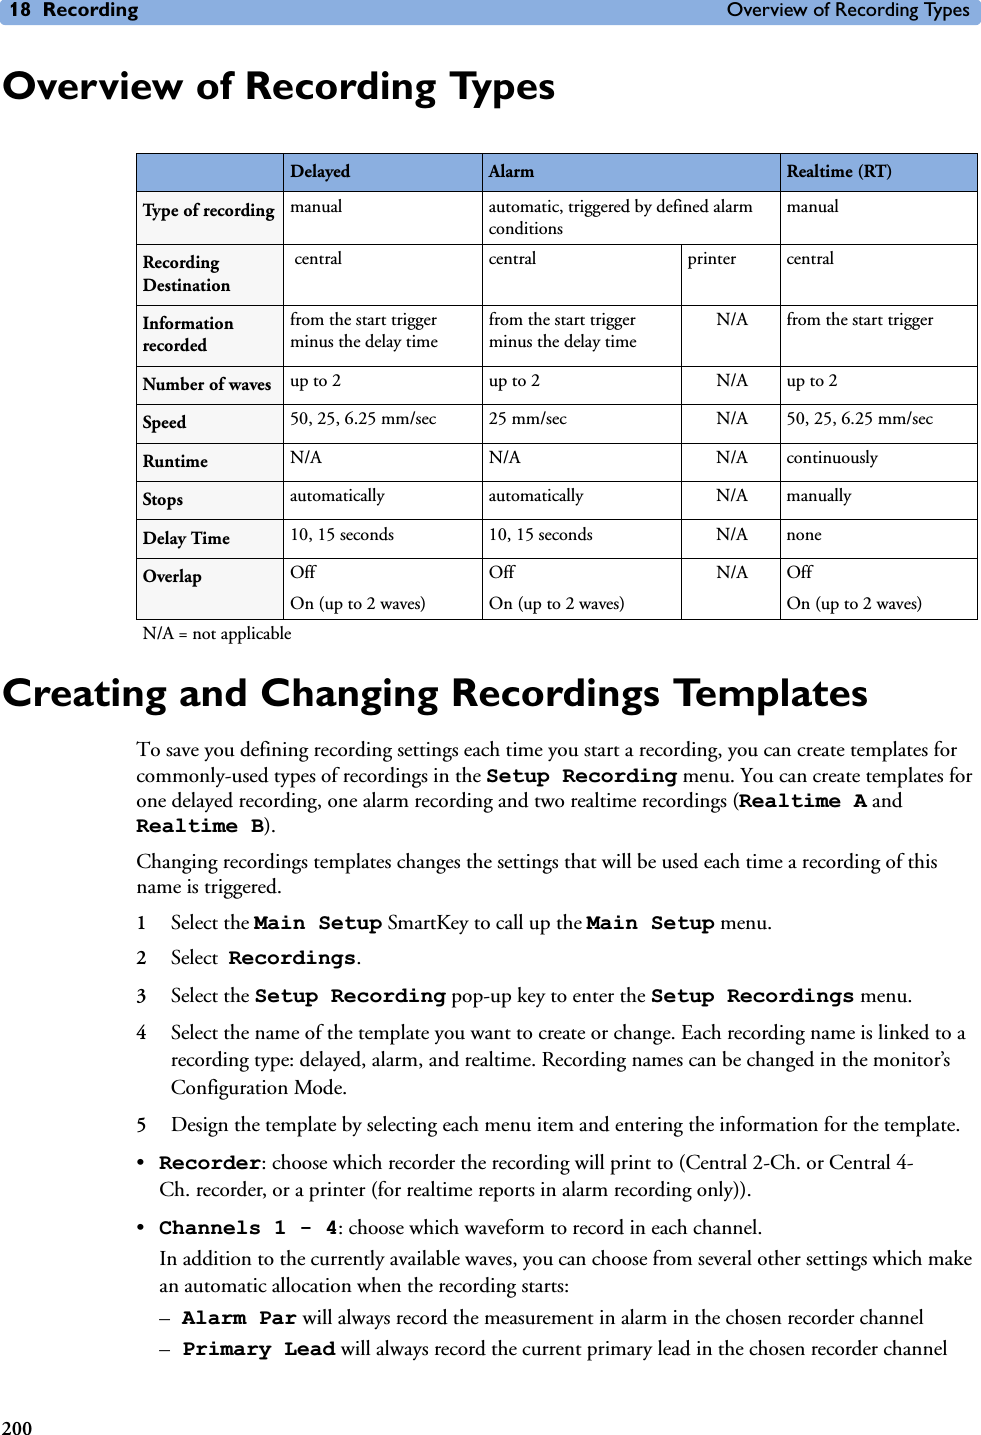 18 Recording Overview of Recording Types200Overview of Recording TypesCreating and Changing Recordings TemplatesTo save you defining recording settings each time you start a recording, you can create templates for commonly-used types of recordings in the Setup Recording menu. You can create templates for one delayed recording, one alarm recording and two realtime recordings (Realtime A and Realtime B).Changing recordings templates changes the settings that will be used each time a recording of this name is triggered.1Select the Main Setup SmartKey to call up the Main Setup menu.2Select  Recordings.3Select the Setup Recording pop-up key to enter the Setup Recordings menu.4Select the name of the template you want to create or change. Each recording name is linked to a recording type: delayed, alarm, and realtime. Recording names can be changed in the monitor’s Configuration Mode.5Design the template by selecting each menu item and entering the information for the template. •Recorder: choose which recorder the recording will print to (Central 2-Ch. or Central 4-Ch. recorder, or a printer (for realtime reports in alarm recording only)). •Channels 1 - 4: choose which waveform to record in each channel.In addition to the currently available waves, you can choose from several other settings which make an automatic allocation when the recording starts:–Alarm Par will always record the measurement in alarm in the chosen recorder channel–Primary Lead will always record the current primary lead in the chosen recorder channelDelayed Alarm Realtime (RT)Type of recording  manual automatic, triggered by defined alarm conditions manualRecording Destination central  central  printer centralInformation recordedfrom the start trigger minus the delay timefrom the start trigger minus the delay timeN/A from the start triggerNumber of waves up to 2 up to 2 N/A up to 2Speed 50, 25, 6.25 mm/sec 25 mm/sec N/A 50, 25, 6.25 mm/secRuntime N/A N/A N/A continuouslyStops automatically automatically N/A manuallyDelay Time 10, 15 seconds 10, 15 seconds N/A noneOverlap OffOn (up to 2 waves)OffOn (up to 2 waves)N/A OffOn (up to 2 waves)N/A = not applicable